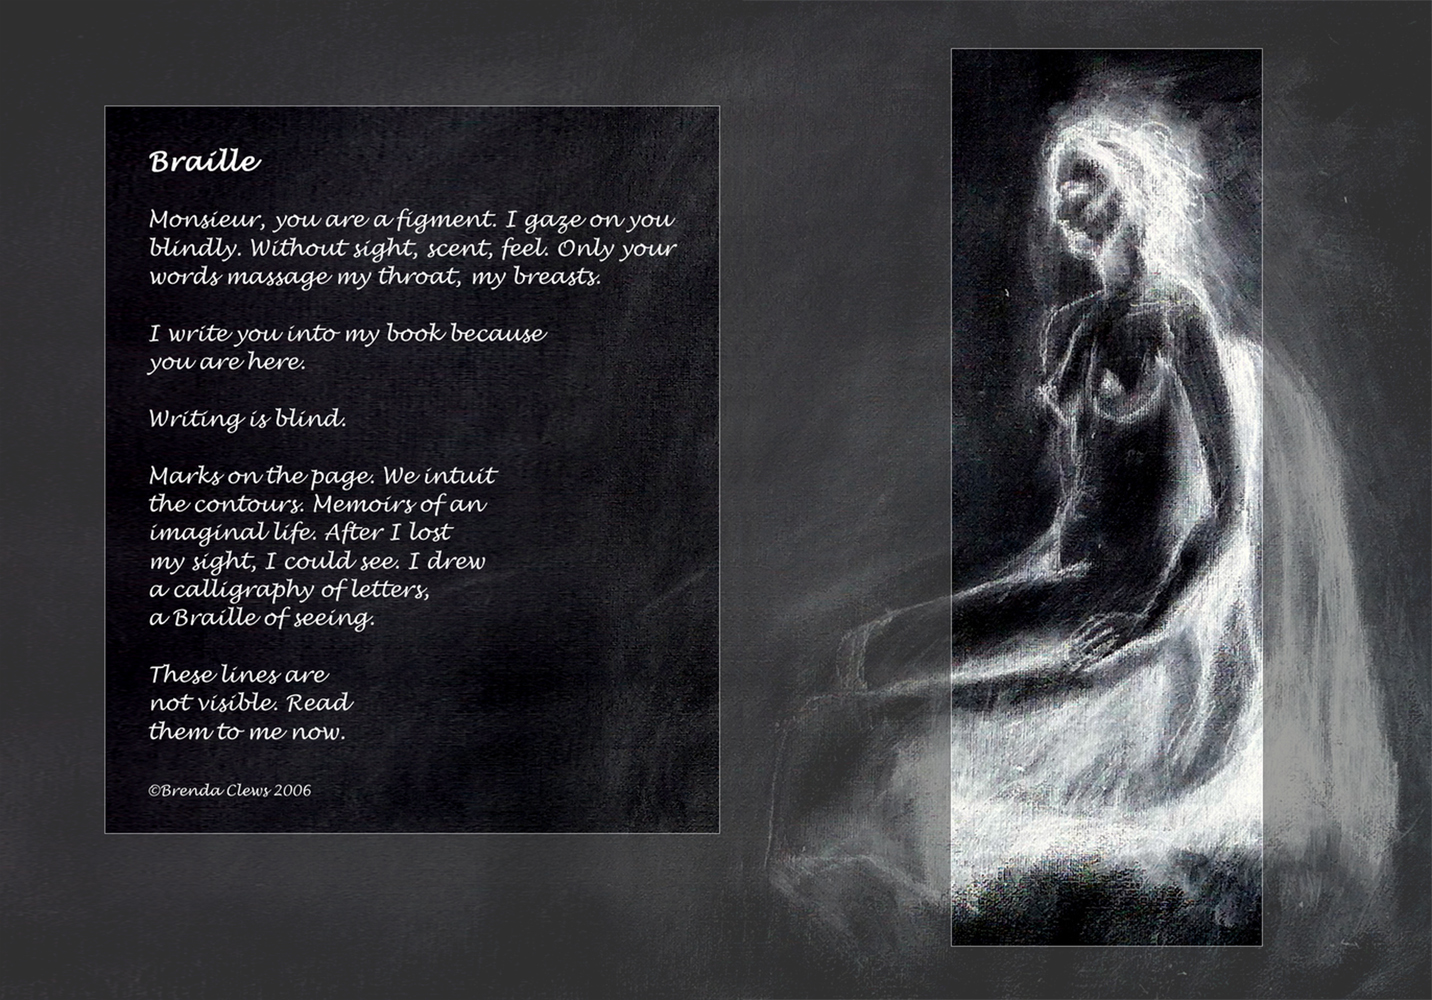 3 Braille, 2006 and 2012, charcoal sketch inverted and made into a poem painting.